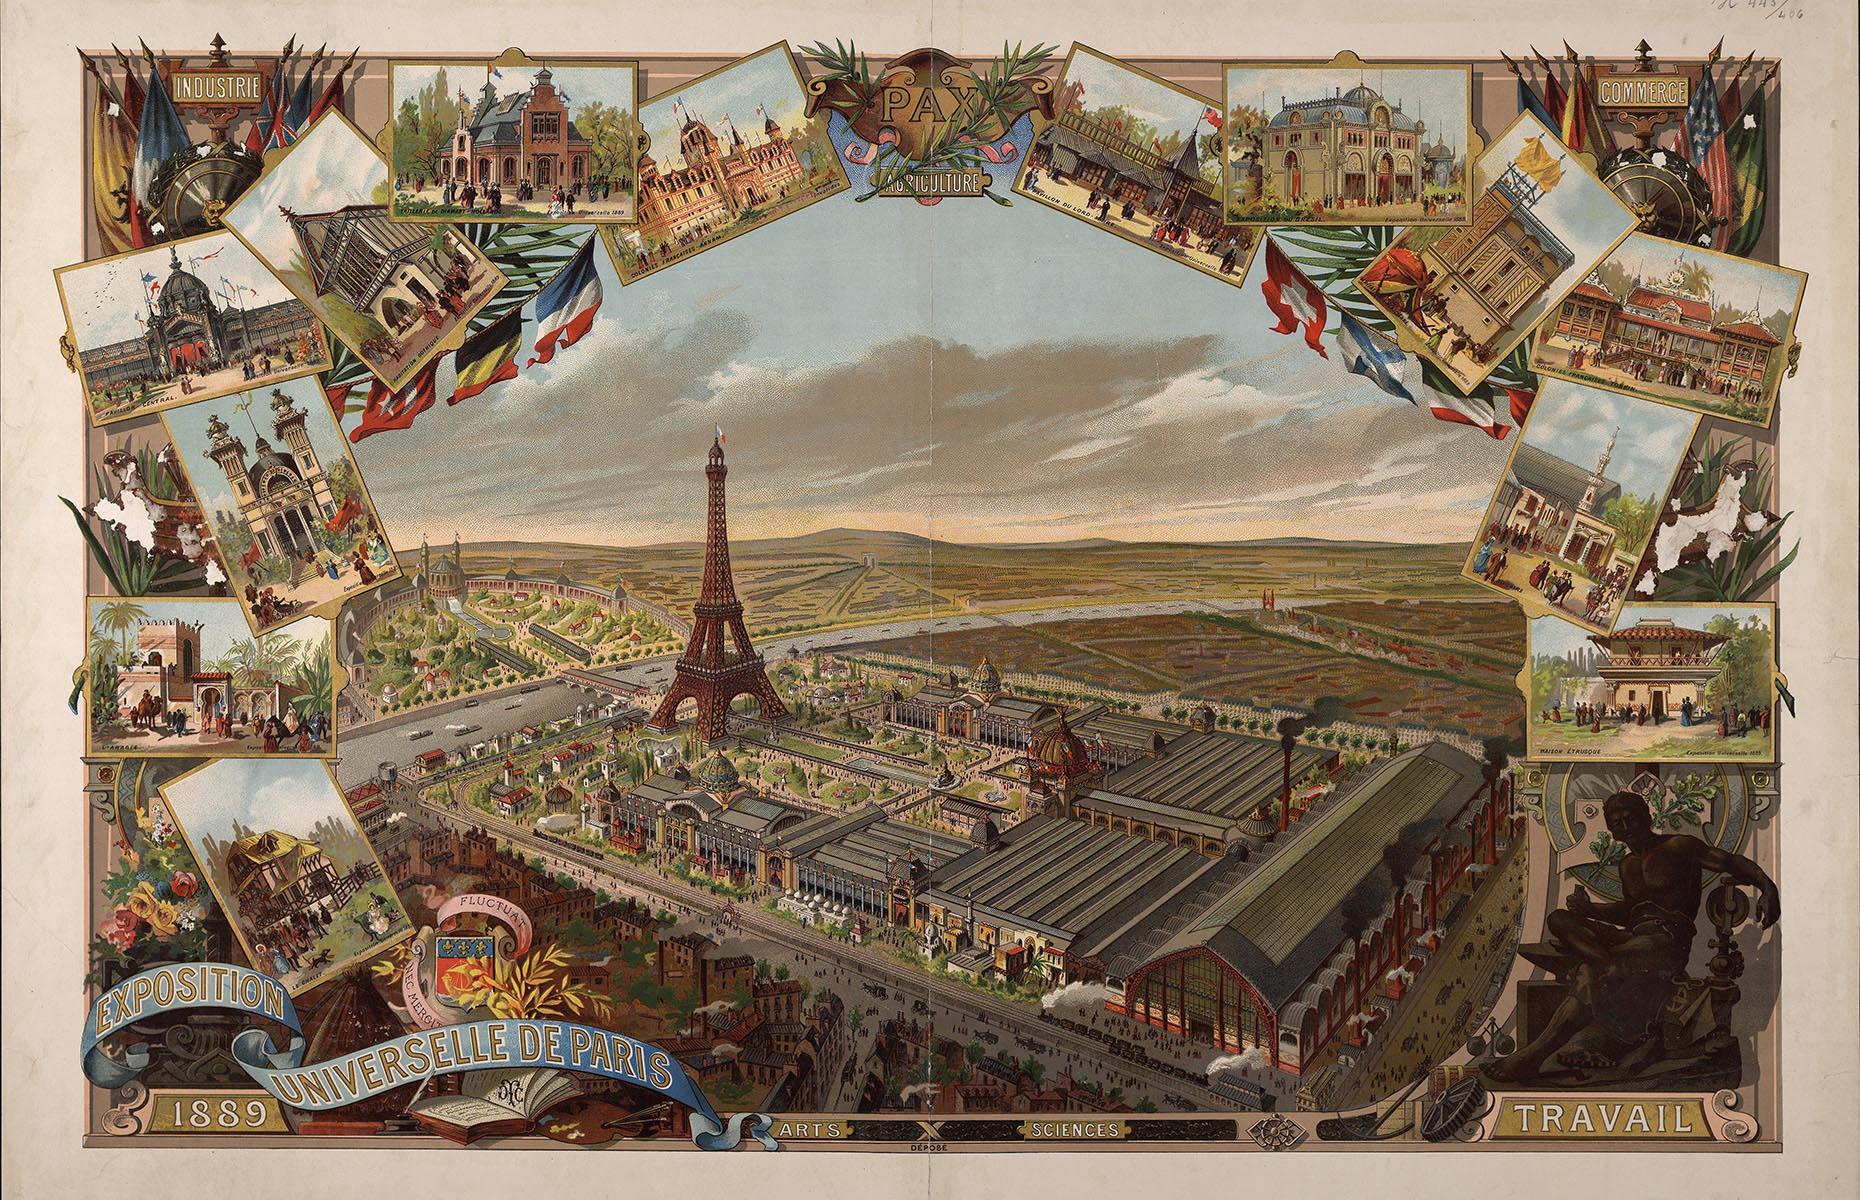 <p>The 1889 Exposition Universelle was held in Paris to celebrate the centenary of the French Revolution and to showcase France’s industrial and cultural might. In 1886 the organizers held a competition for designs for a suitable monument to be the centerpiece of the exposition. More than 100 plans were submitted, and the Centennial Committee chose the design by the noted bridge engineer Gustave Eiffel. When it was completed, the tower served as the entrance gateway to the exposition.</p>